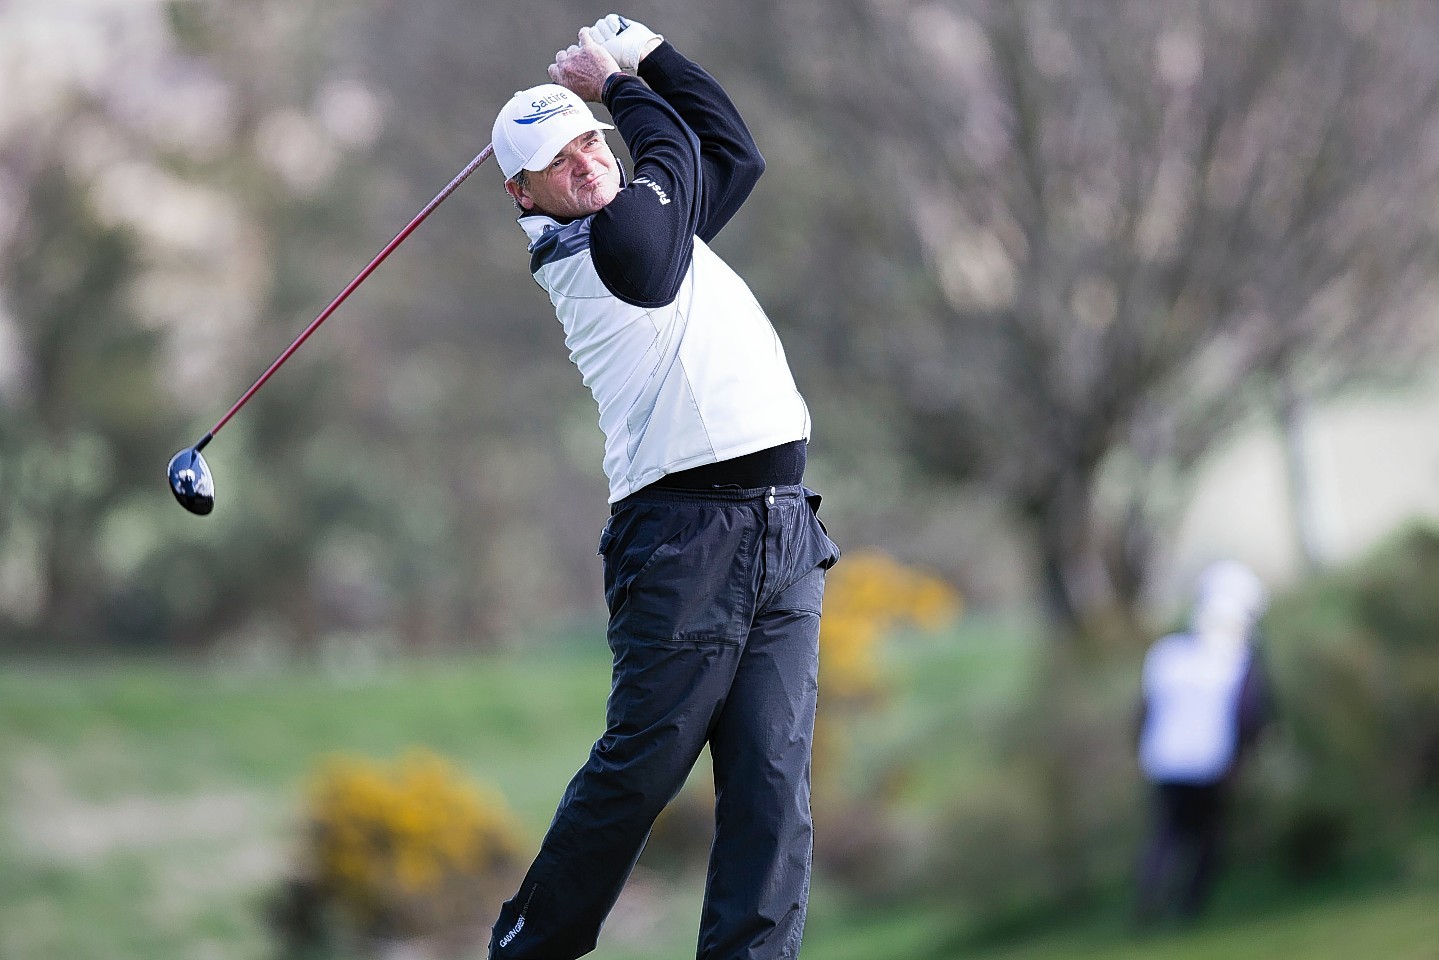 Paul Lawrie: The Aberdonian shot a seven over par 79 in his opening round.